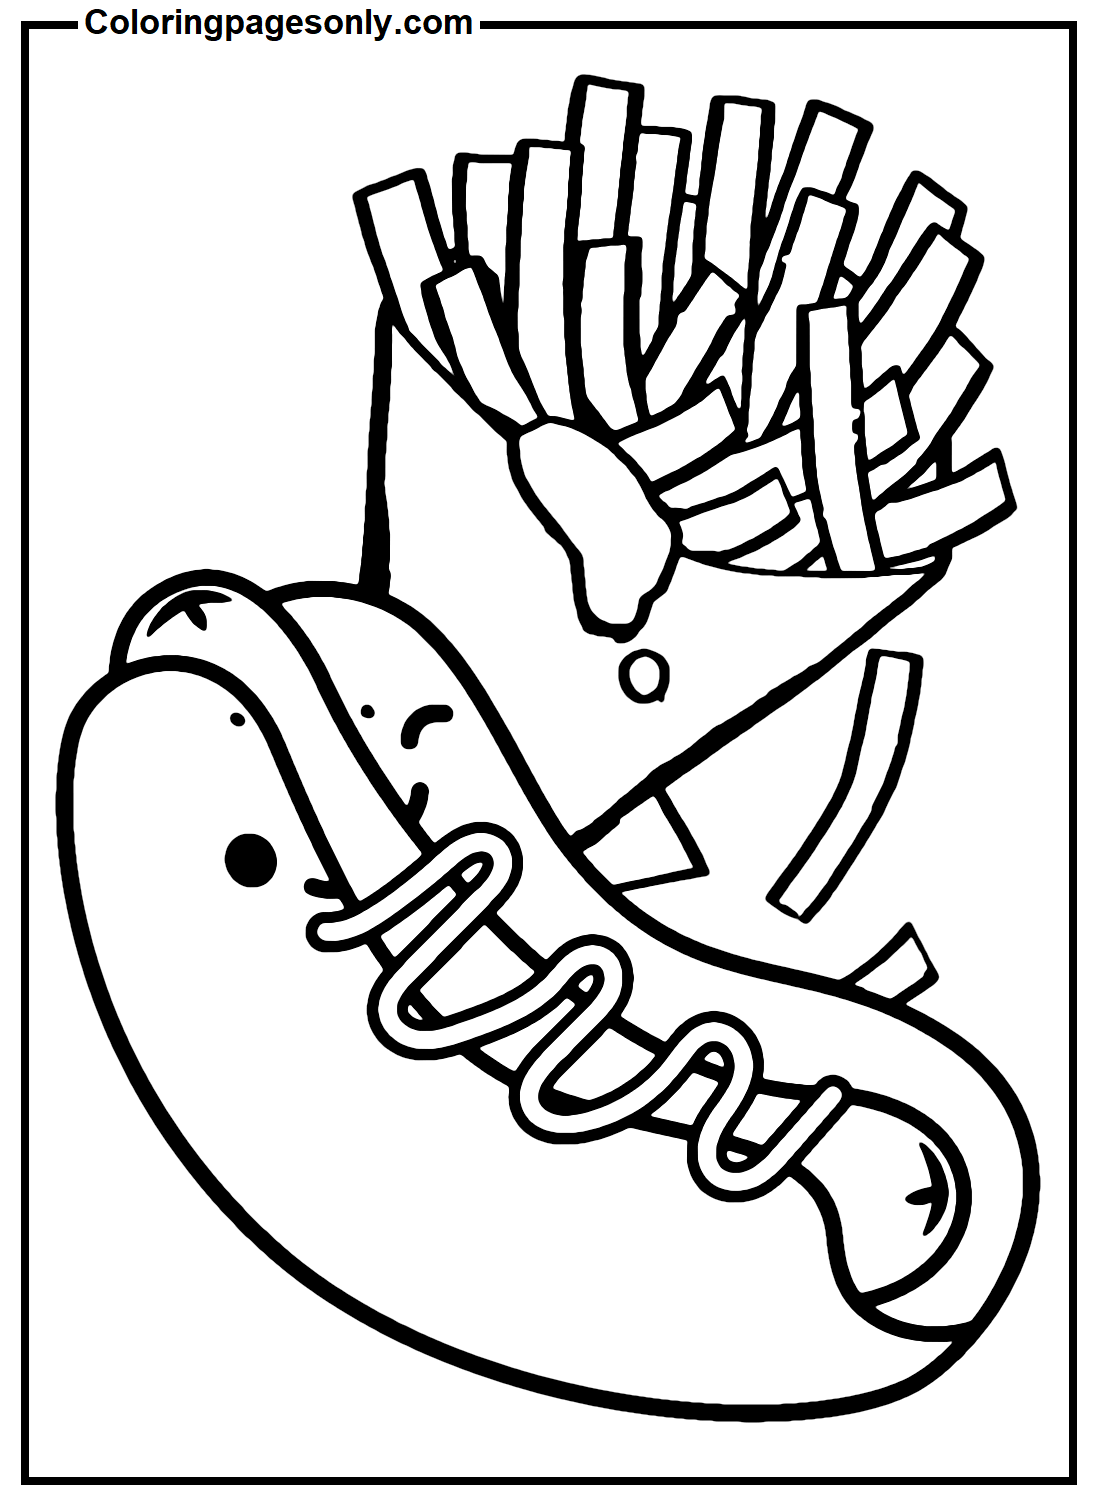 Cute Hot Dog With French Fries Coloring Pages